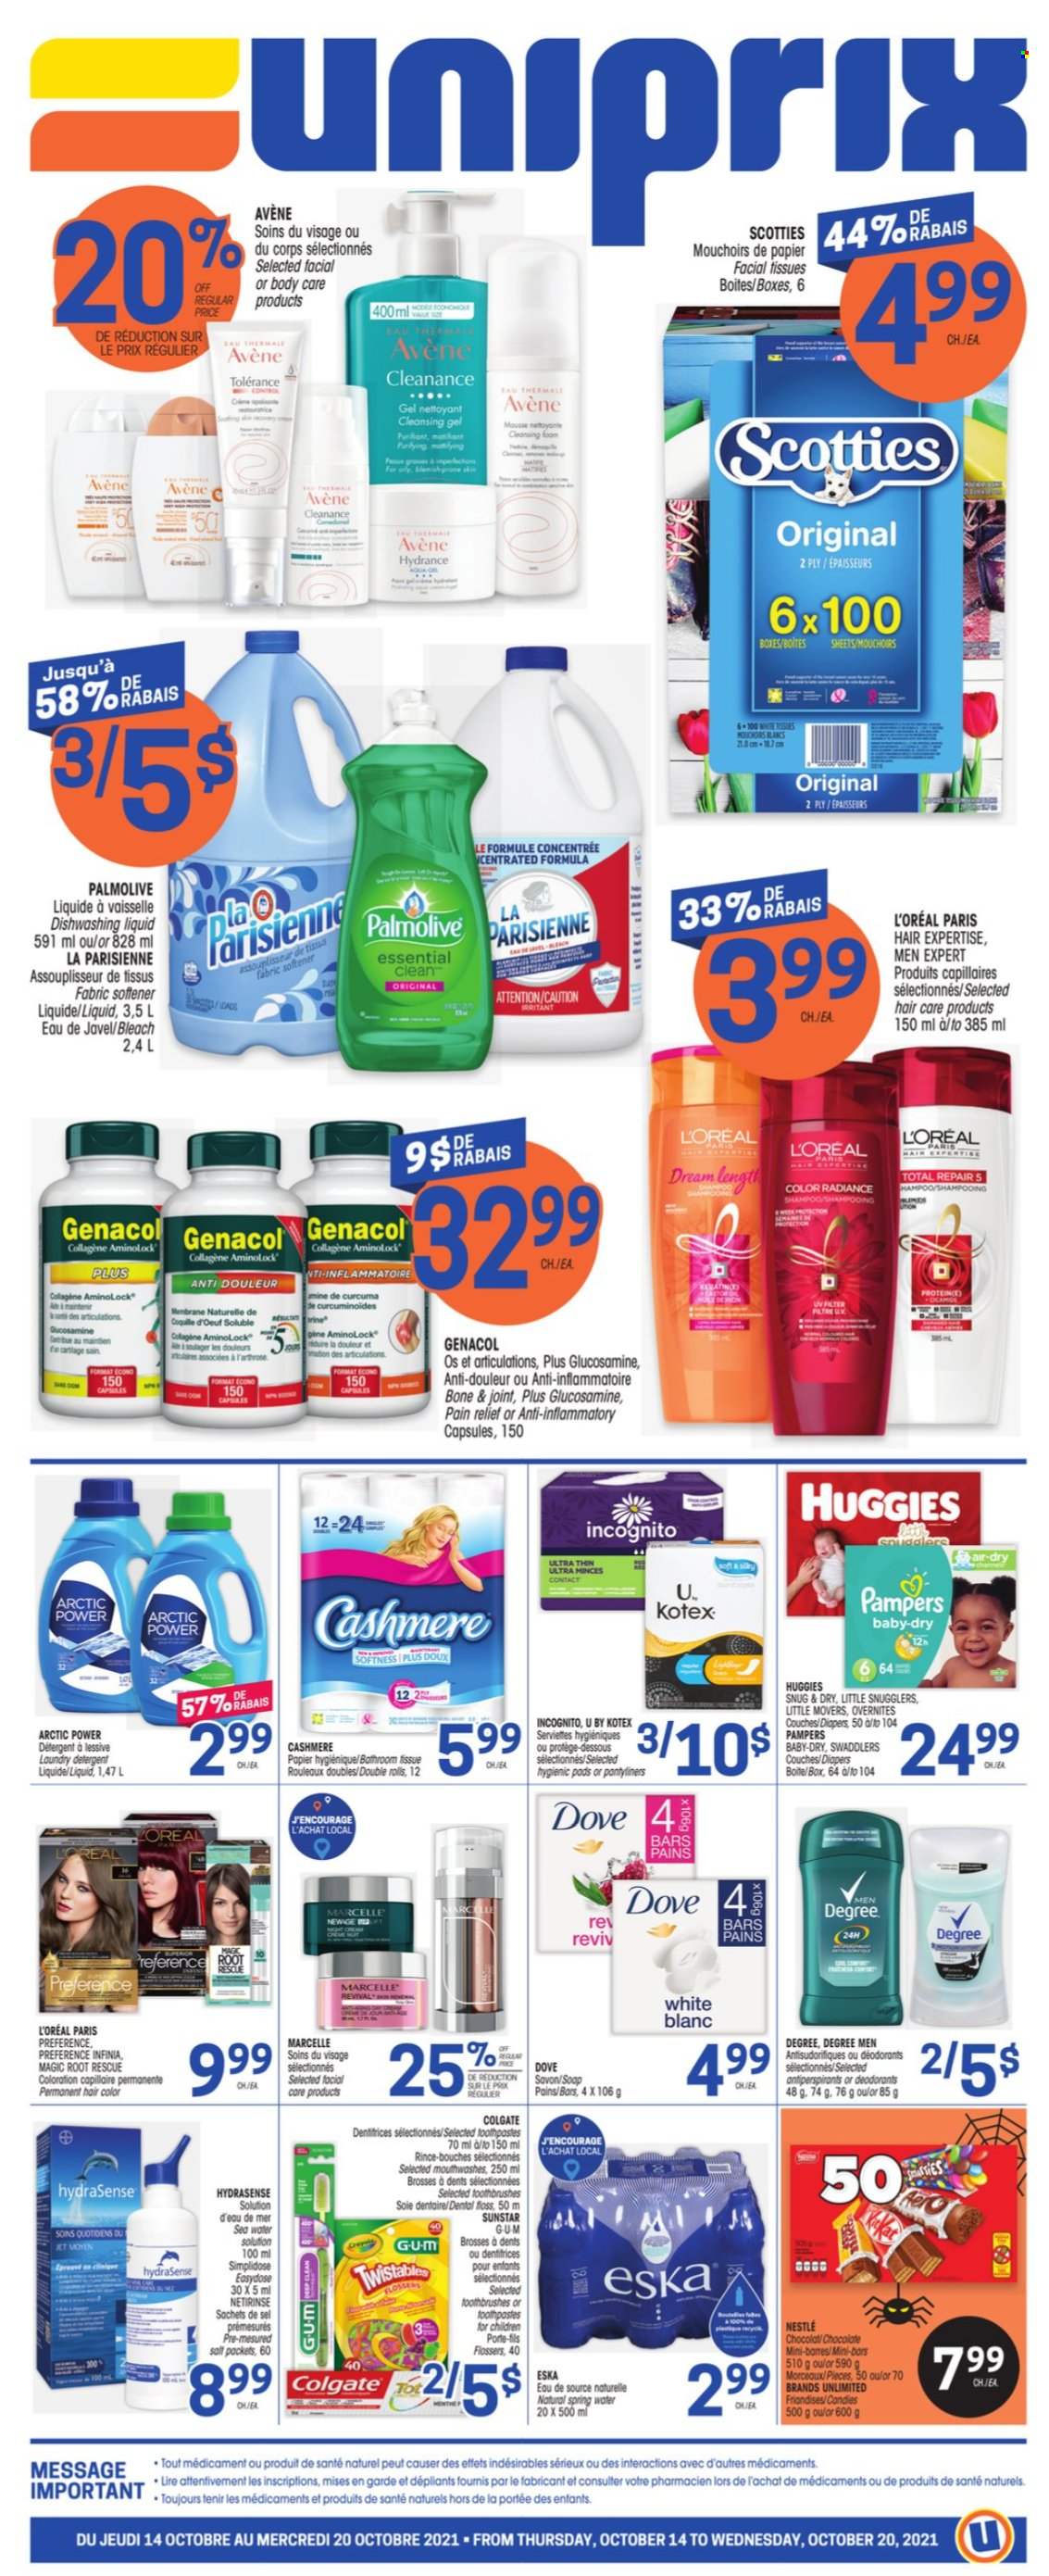 thumbnail - Uniprix Flyer - October 14, 2021 - October 20, 2021 - Sales products - chocolate, salt, spring water, nappies, tissues, bleach, fabric softener, dishwashing liquid, Palmolive, soap, Kotex, pantyliners, facial tissues, L’Oréal, hair color, pain relief, Nestlé, detergent, Dove, Colgate, Huggies, Pampers, deodorant. Page 1.